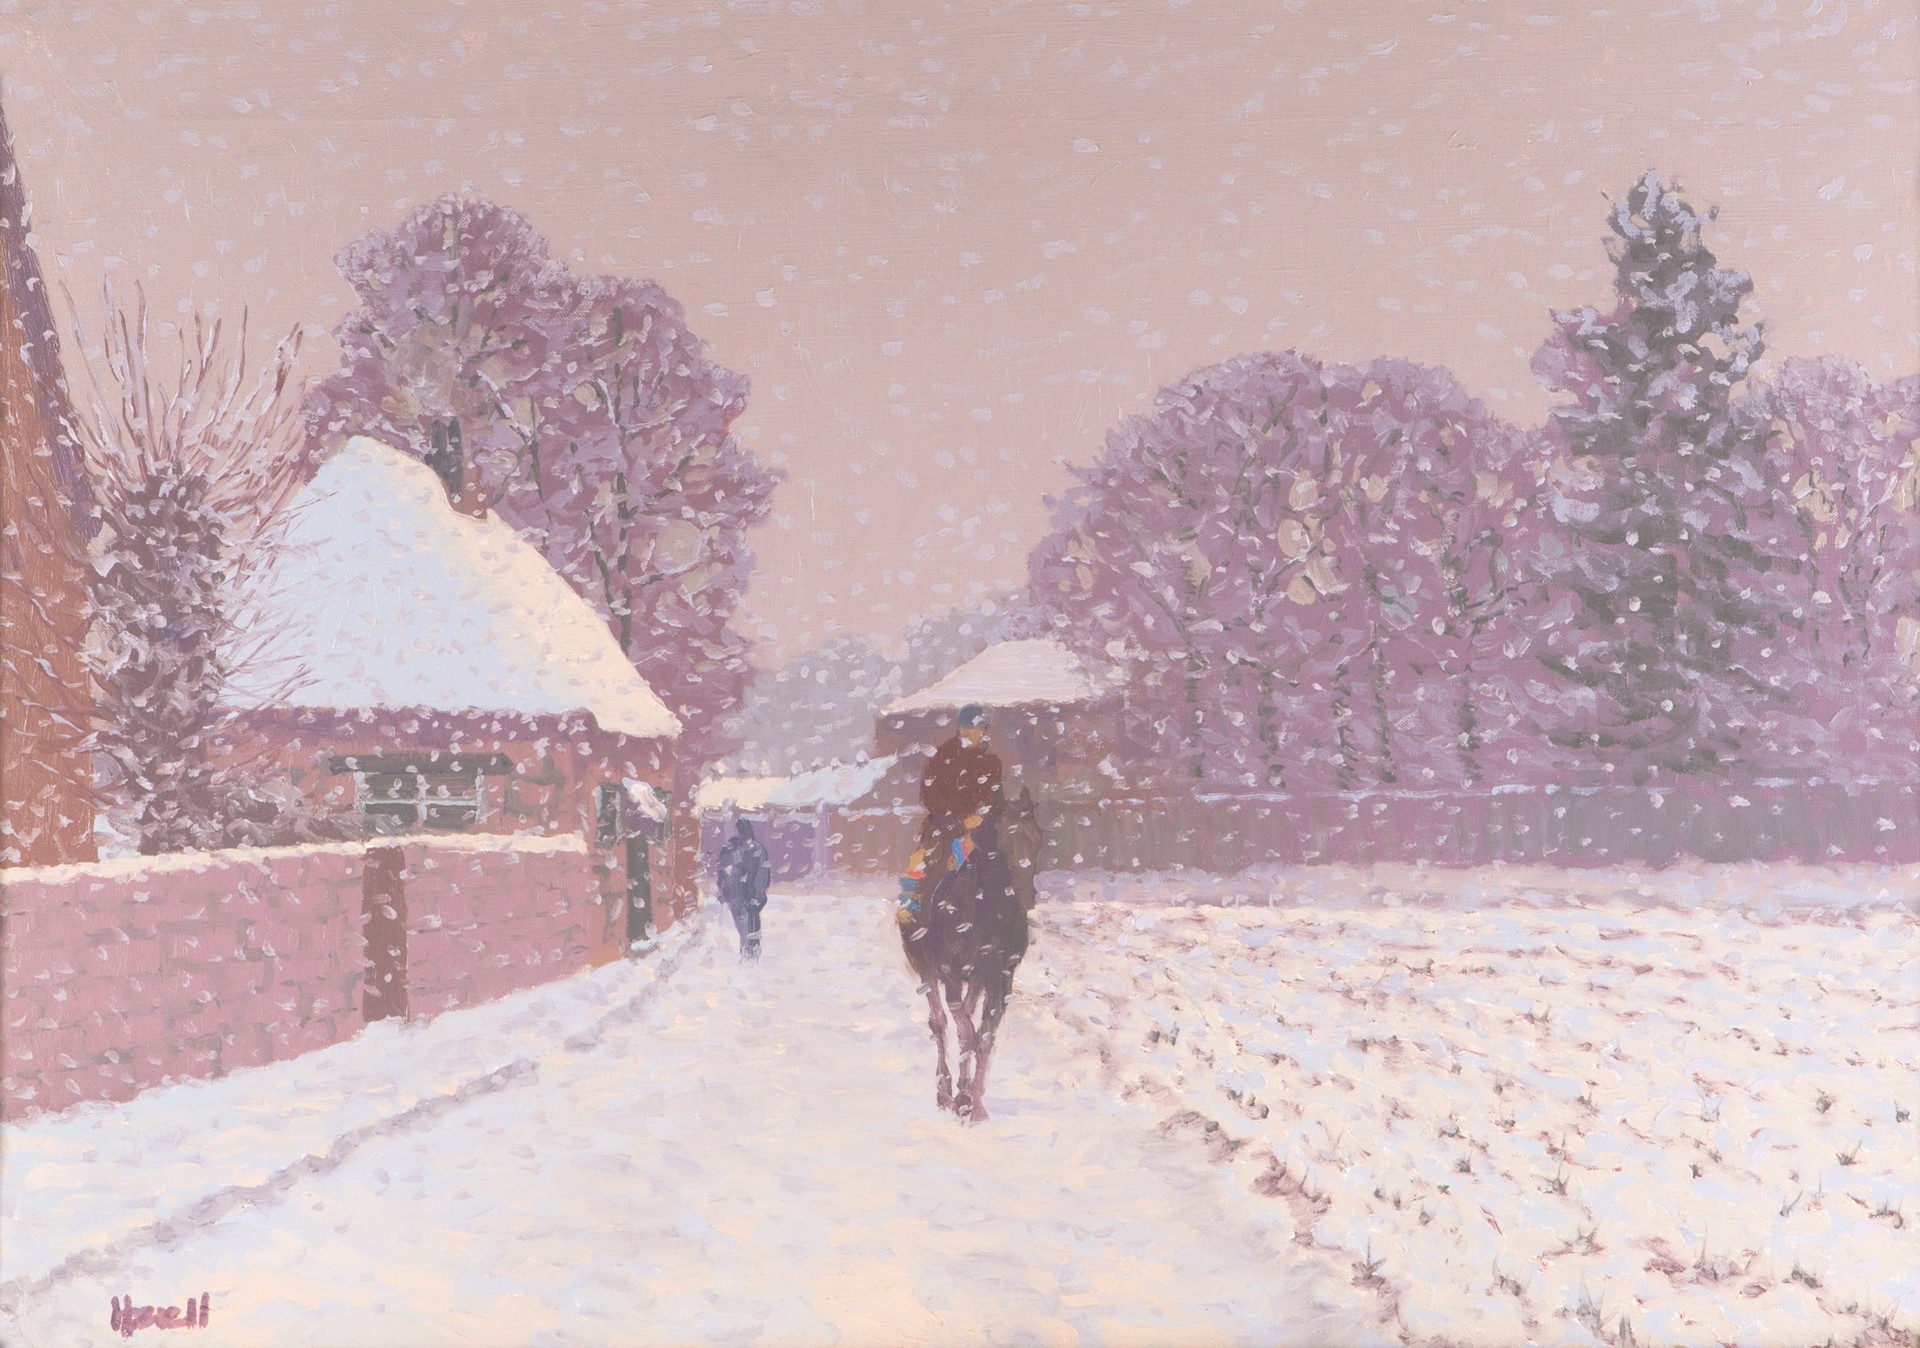 Hacking Out in the Snow by Peter Howell